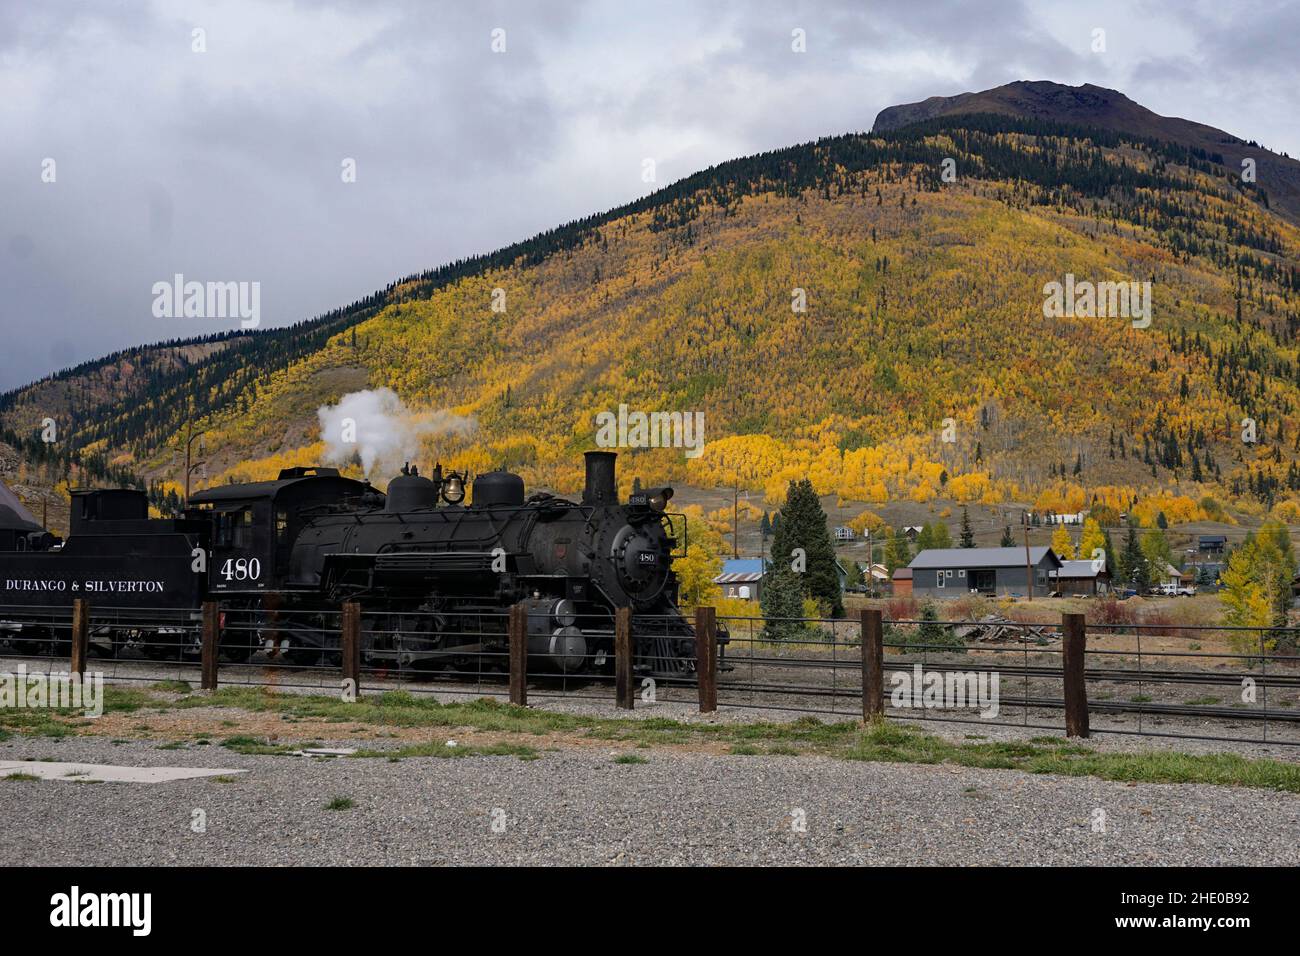 Durango and Silverton Narrow Gauge Railroad in Silverton waiting to depart. The mountains around Silverton are covered with Fall colors. Stock Photo